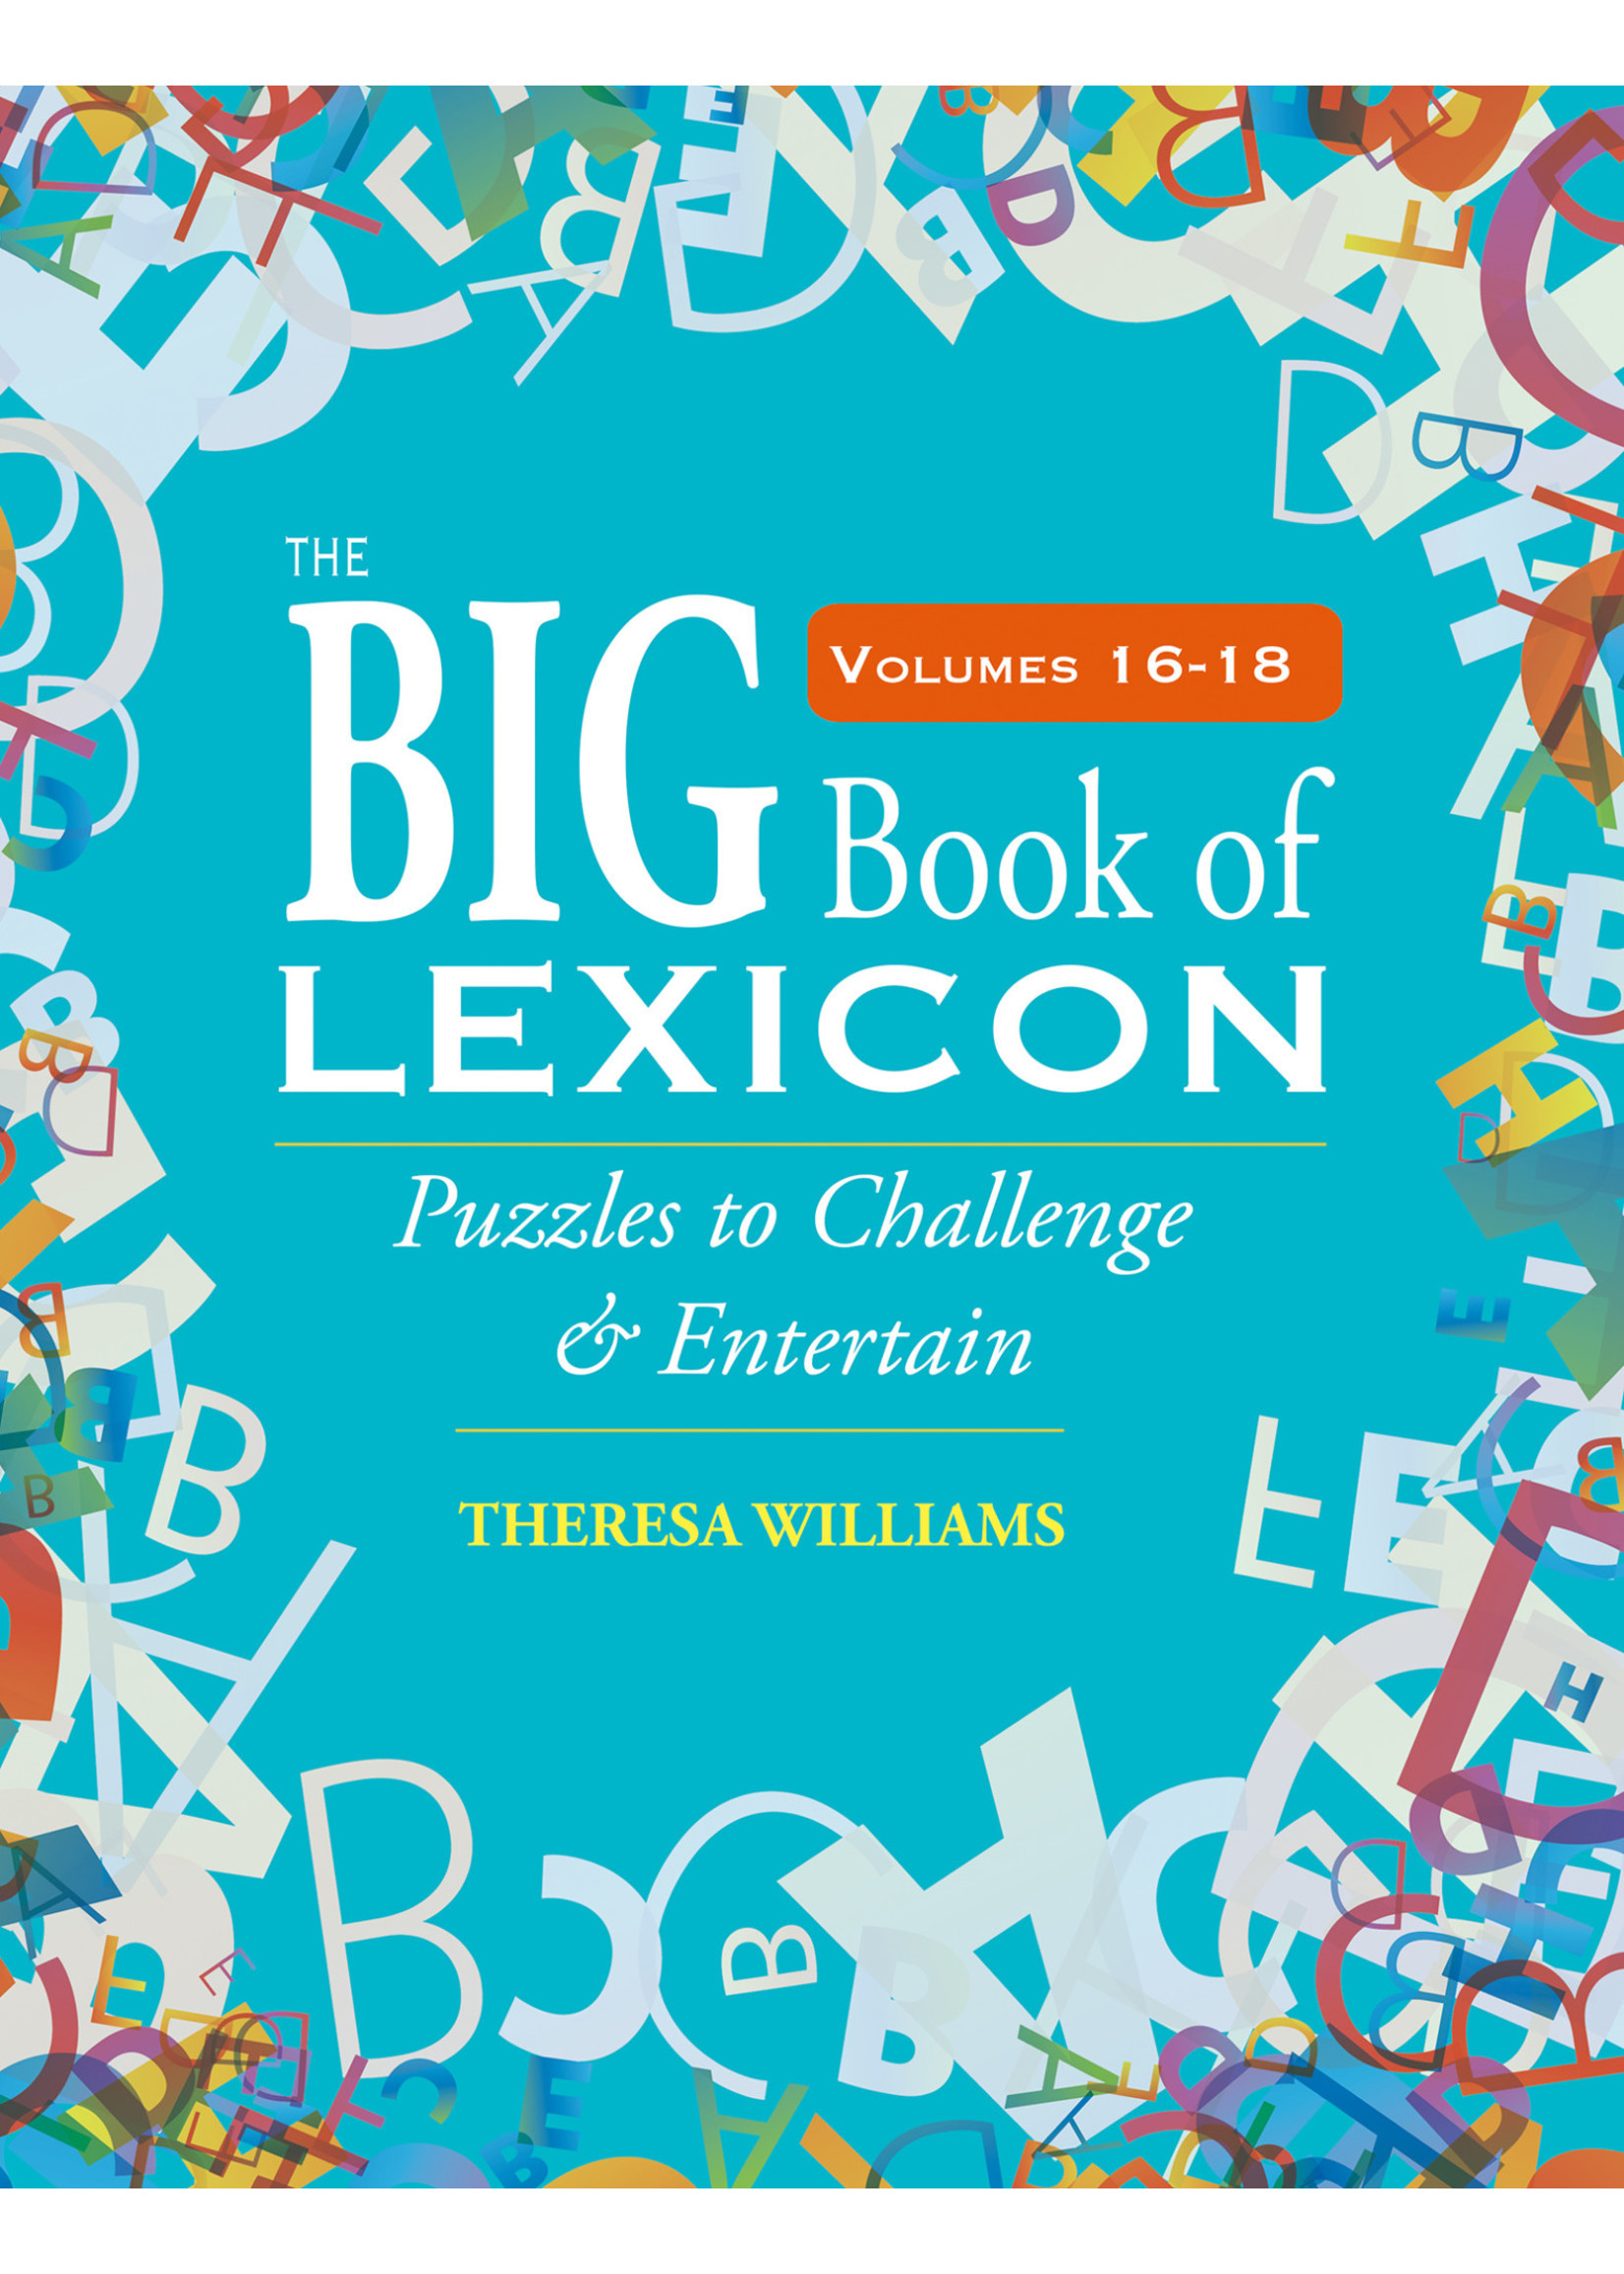 The Big Book of Lexicon: Volumes 16, 17, 18  by Theresa Williams